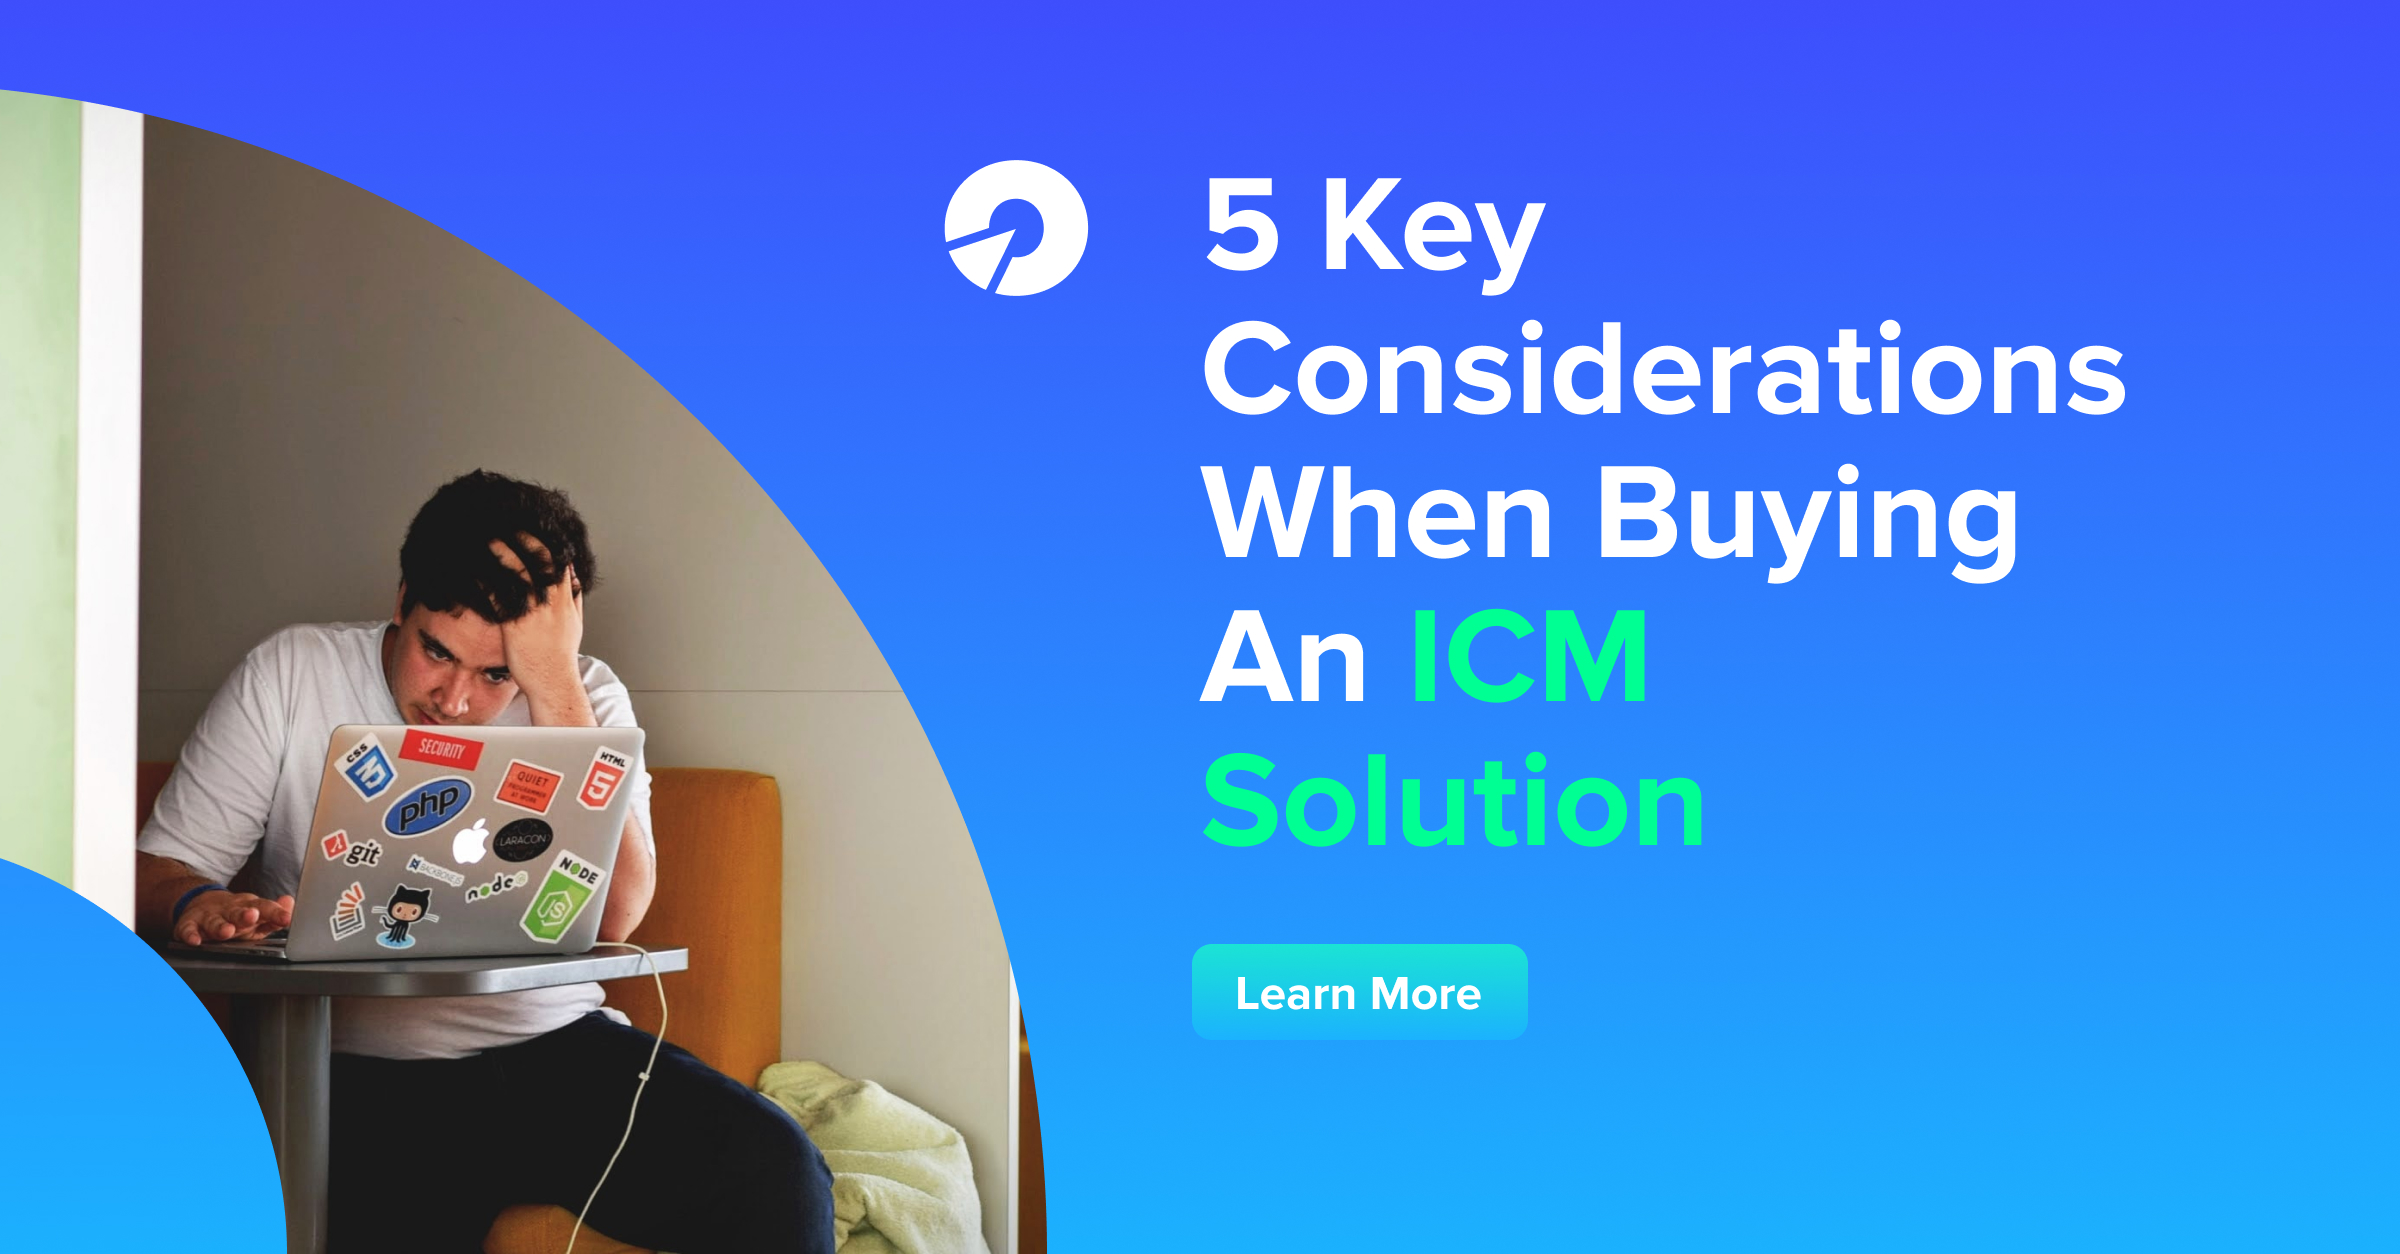 5 Key Considerations When Buying An ICM Solution